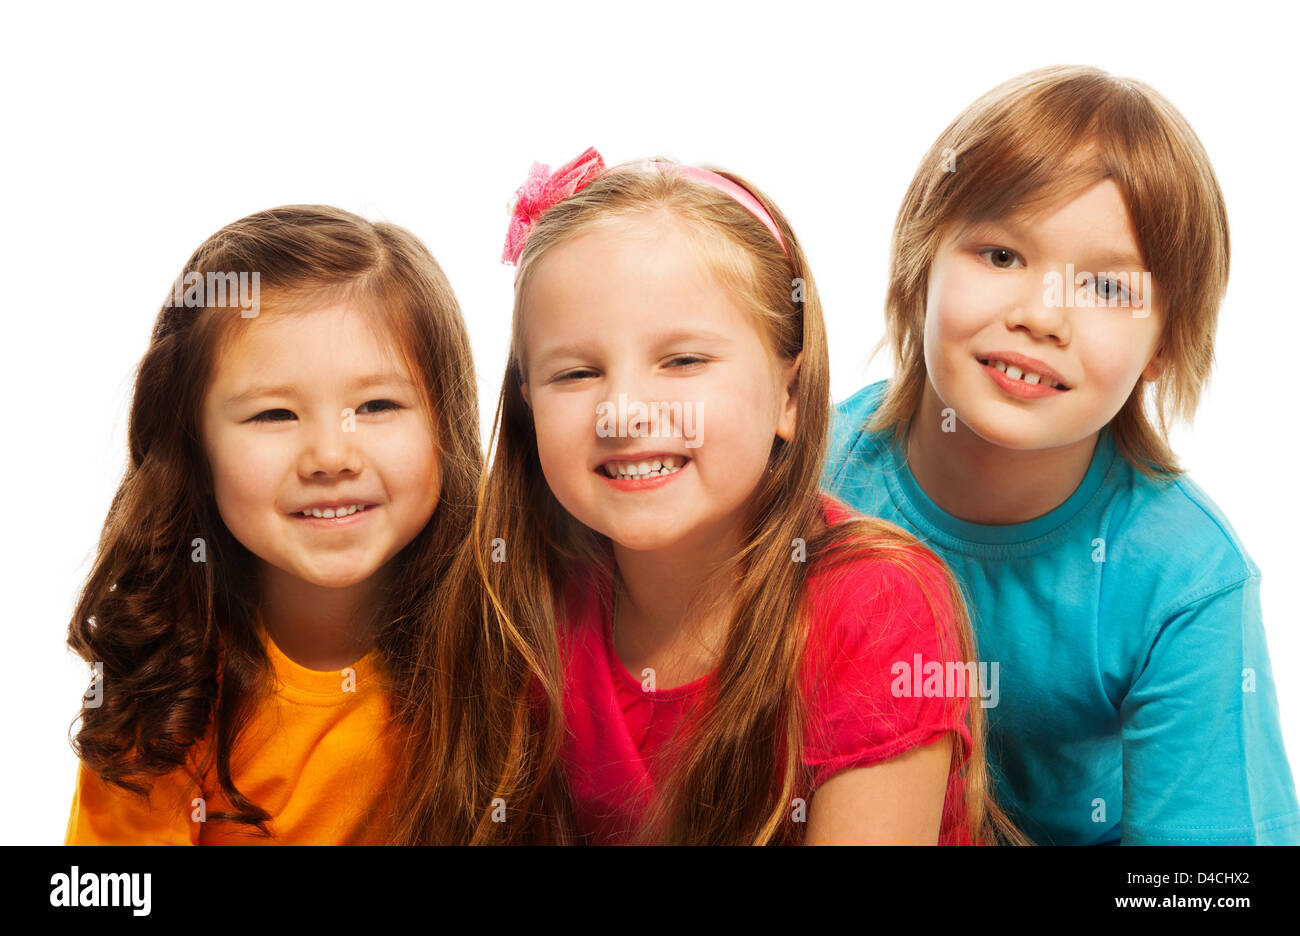 Closeup of a group of three kids, two girls and boy together, diversity looking happy, laughing, hugging, sitting on the floor isolated on white Stock Photo